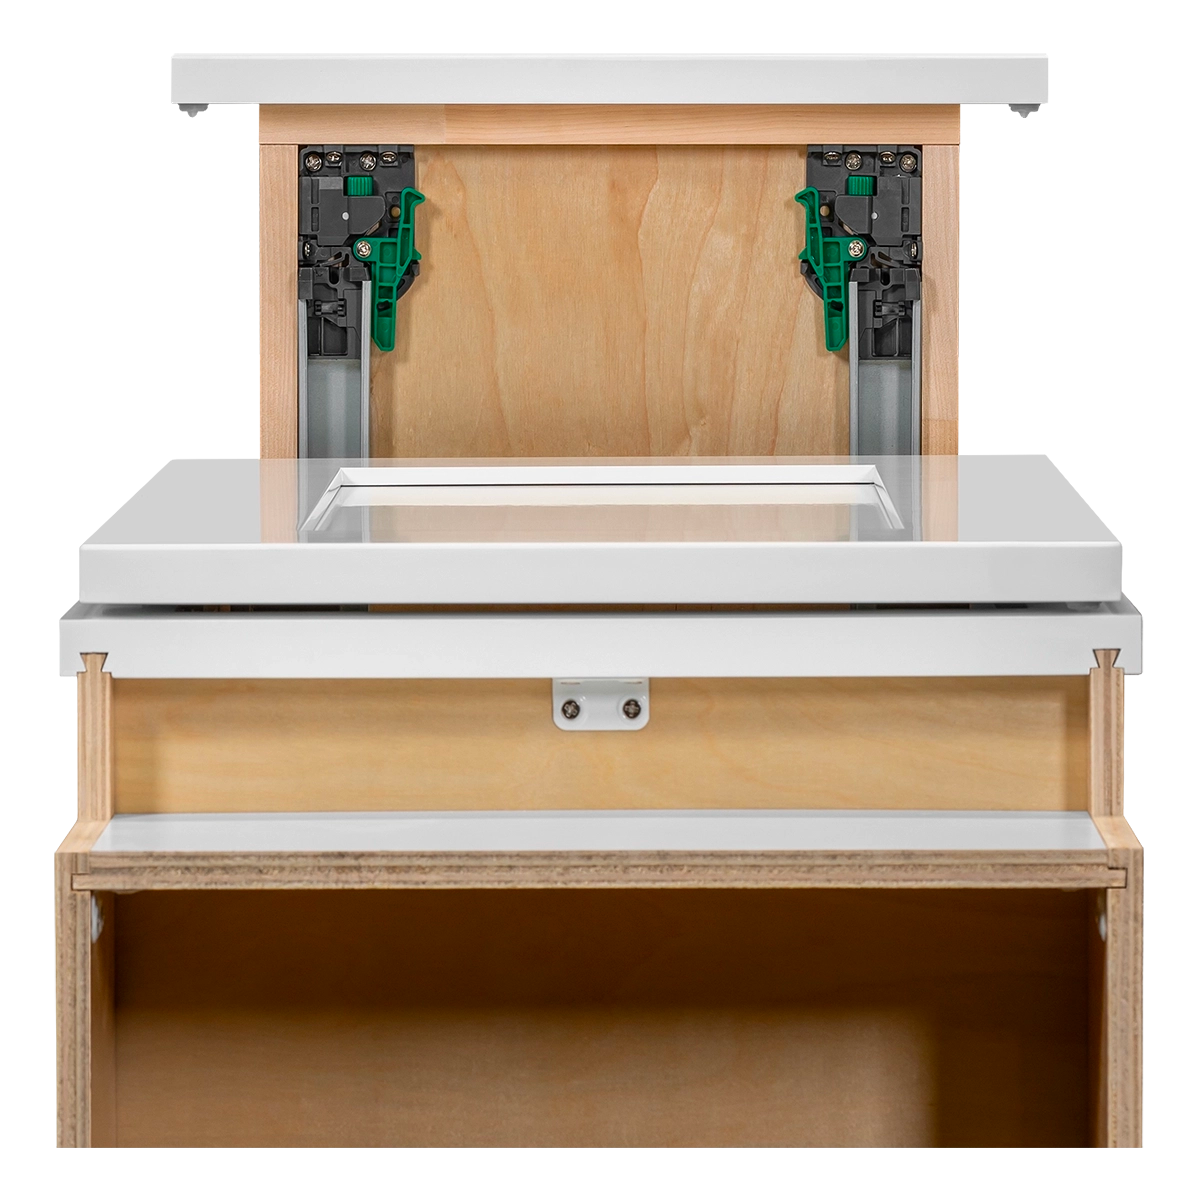 What are Some Advantages of Soft-Close Cabinet Hinges and Drawer Glides?